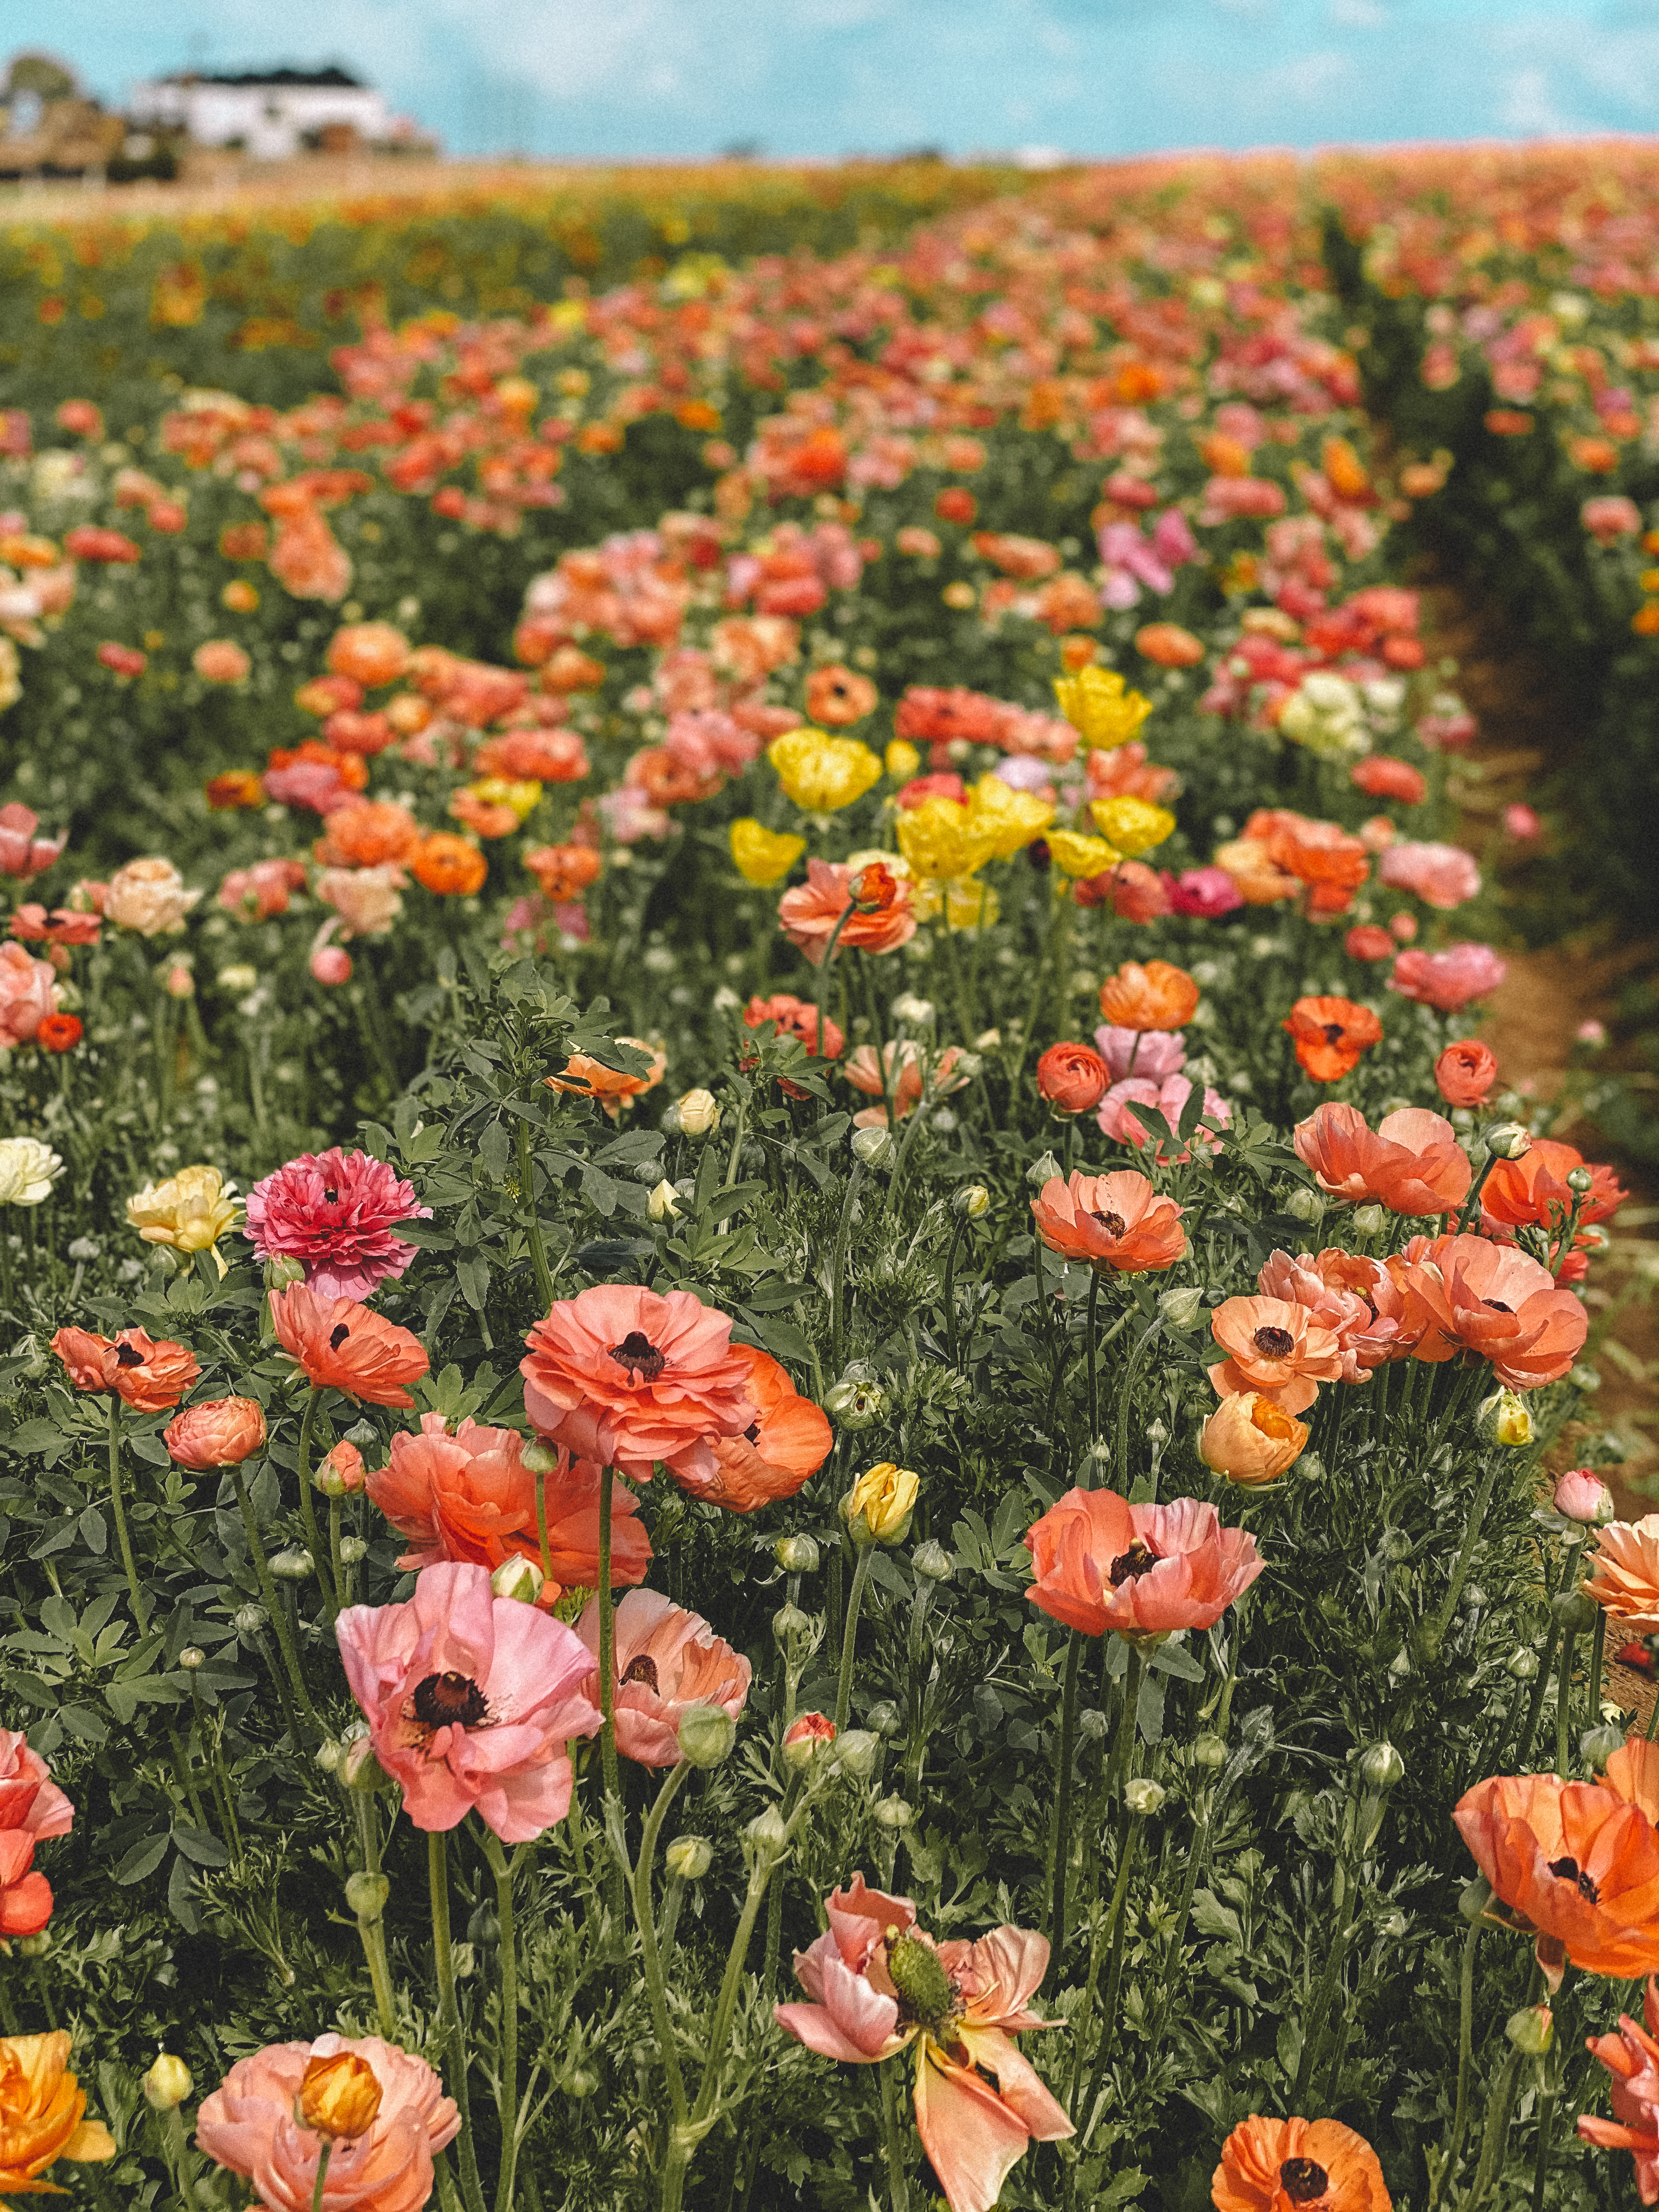 Everything you need to know about visiting the Carlsbad Flower Fields